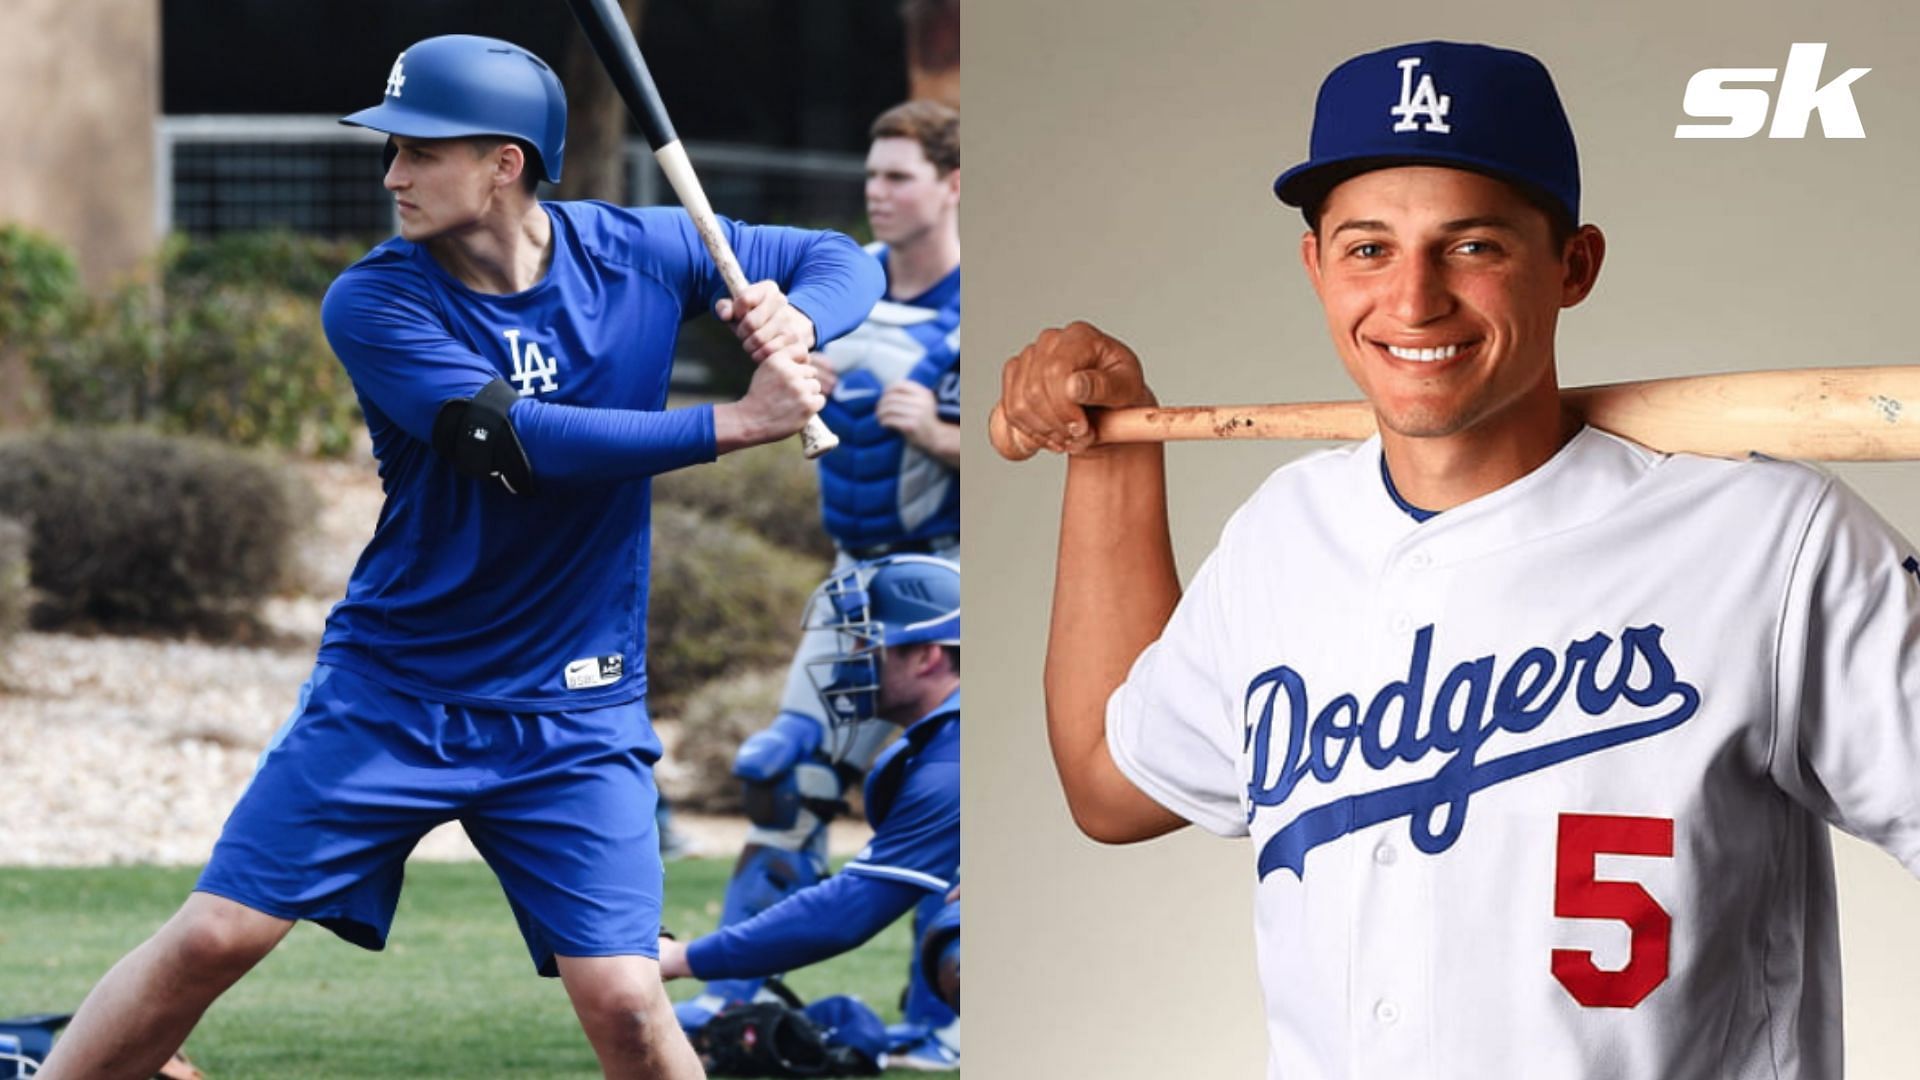 Fans rejoice as Corey Seager and family inspire at Rangers Youth